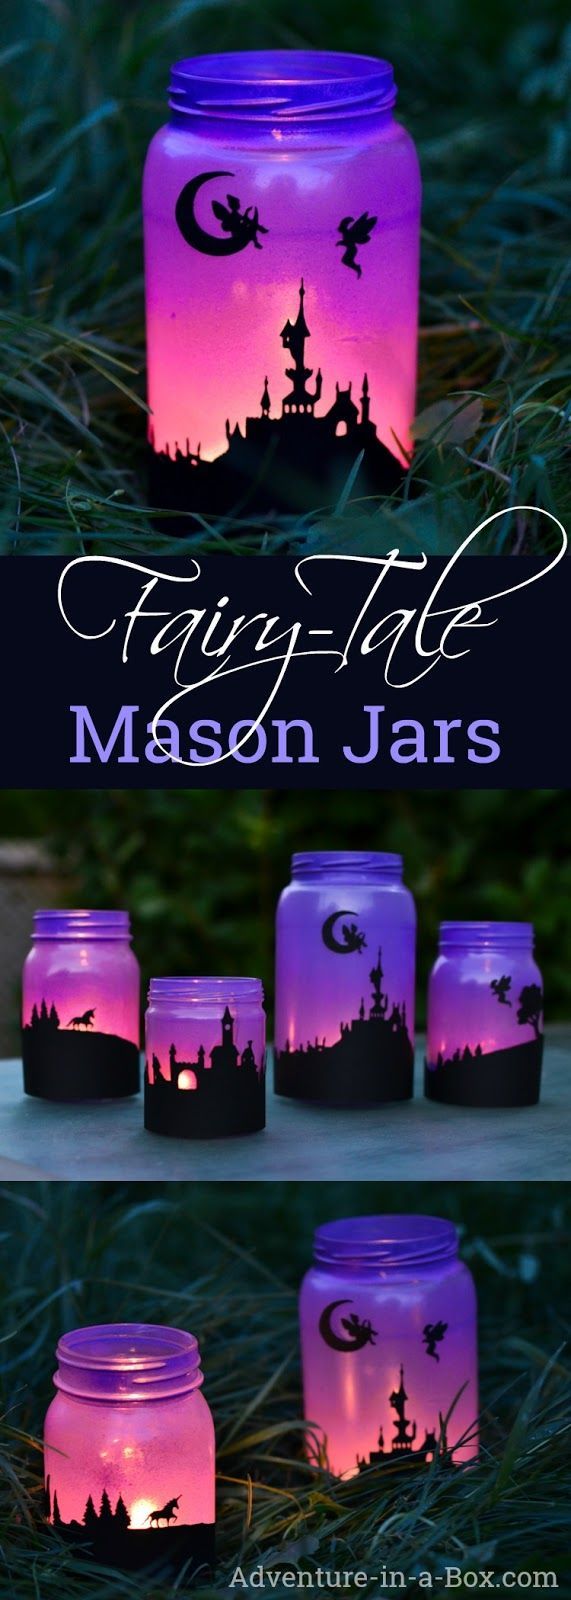 50 Of The Best Ways You Can Decorate With Mason Jar Crafts -   16 diy projects For The Home mason jars ideas